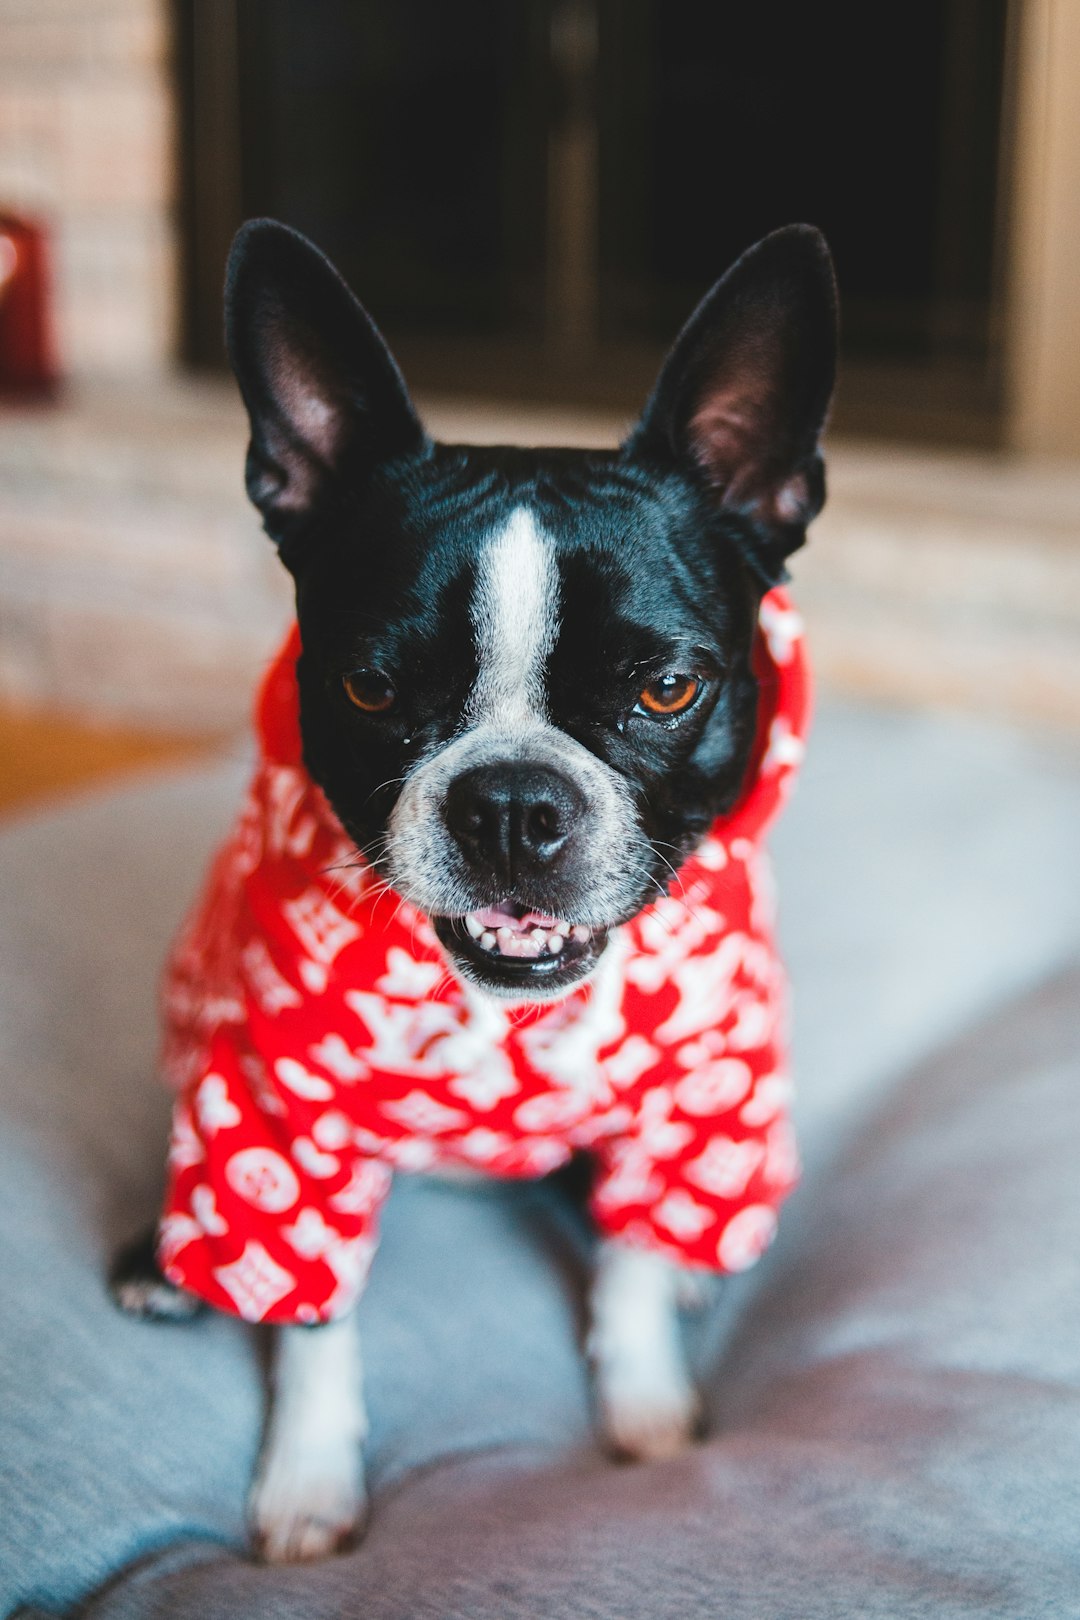 black and white short coated small dog wearing red and black polka dot shirt